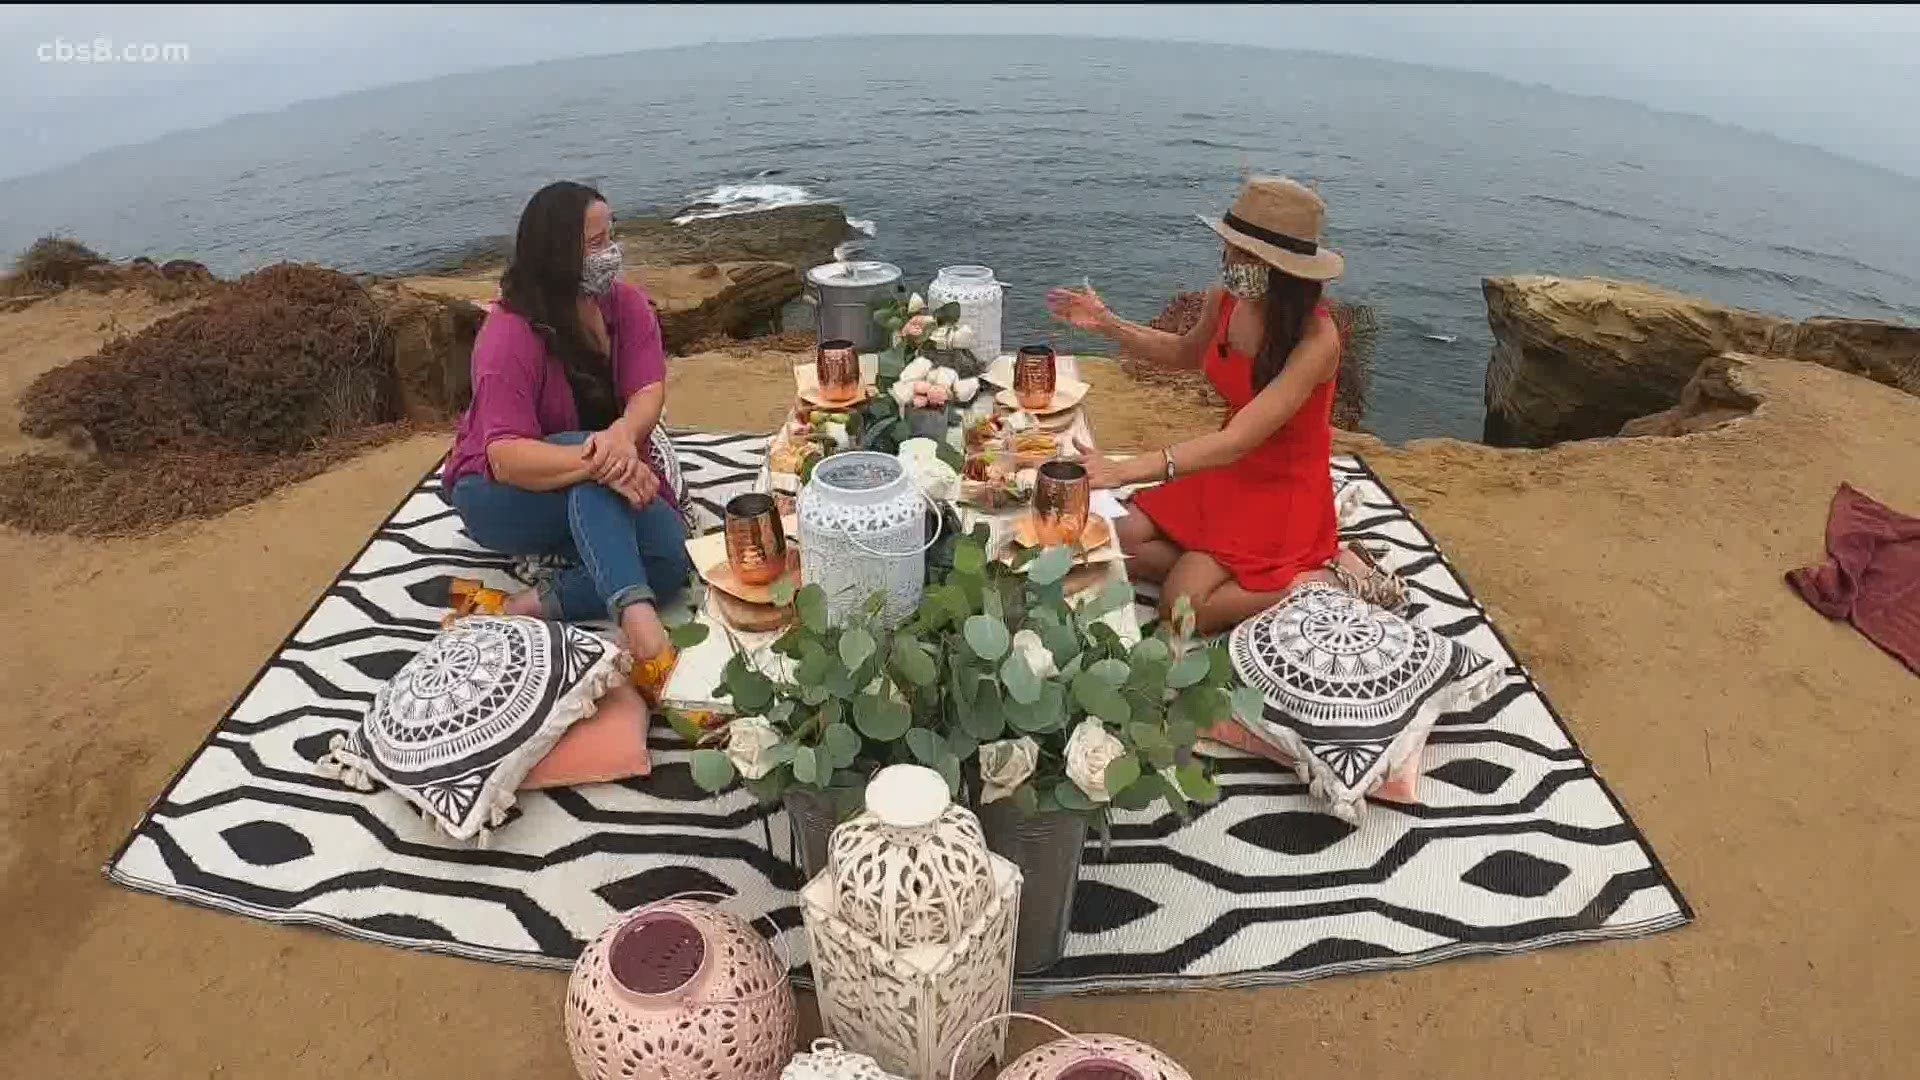 tvivl flamme Streng Out & About: Rent yourself a luxury pop-up picnic | cbs8.com